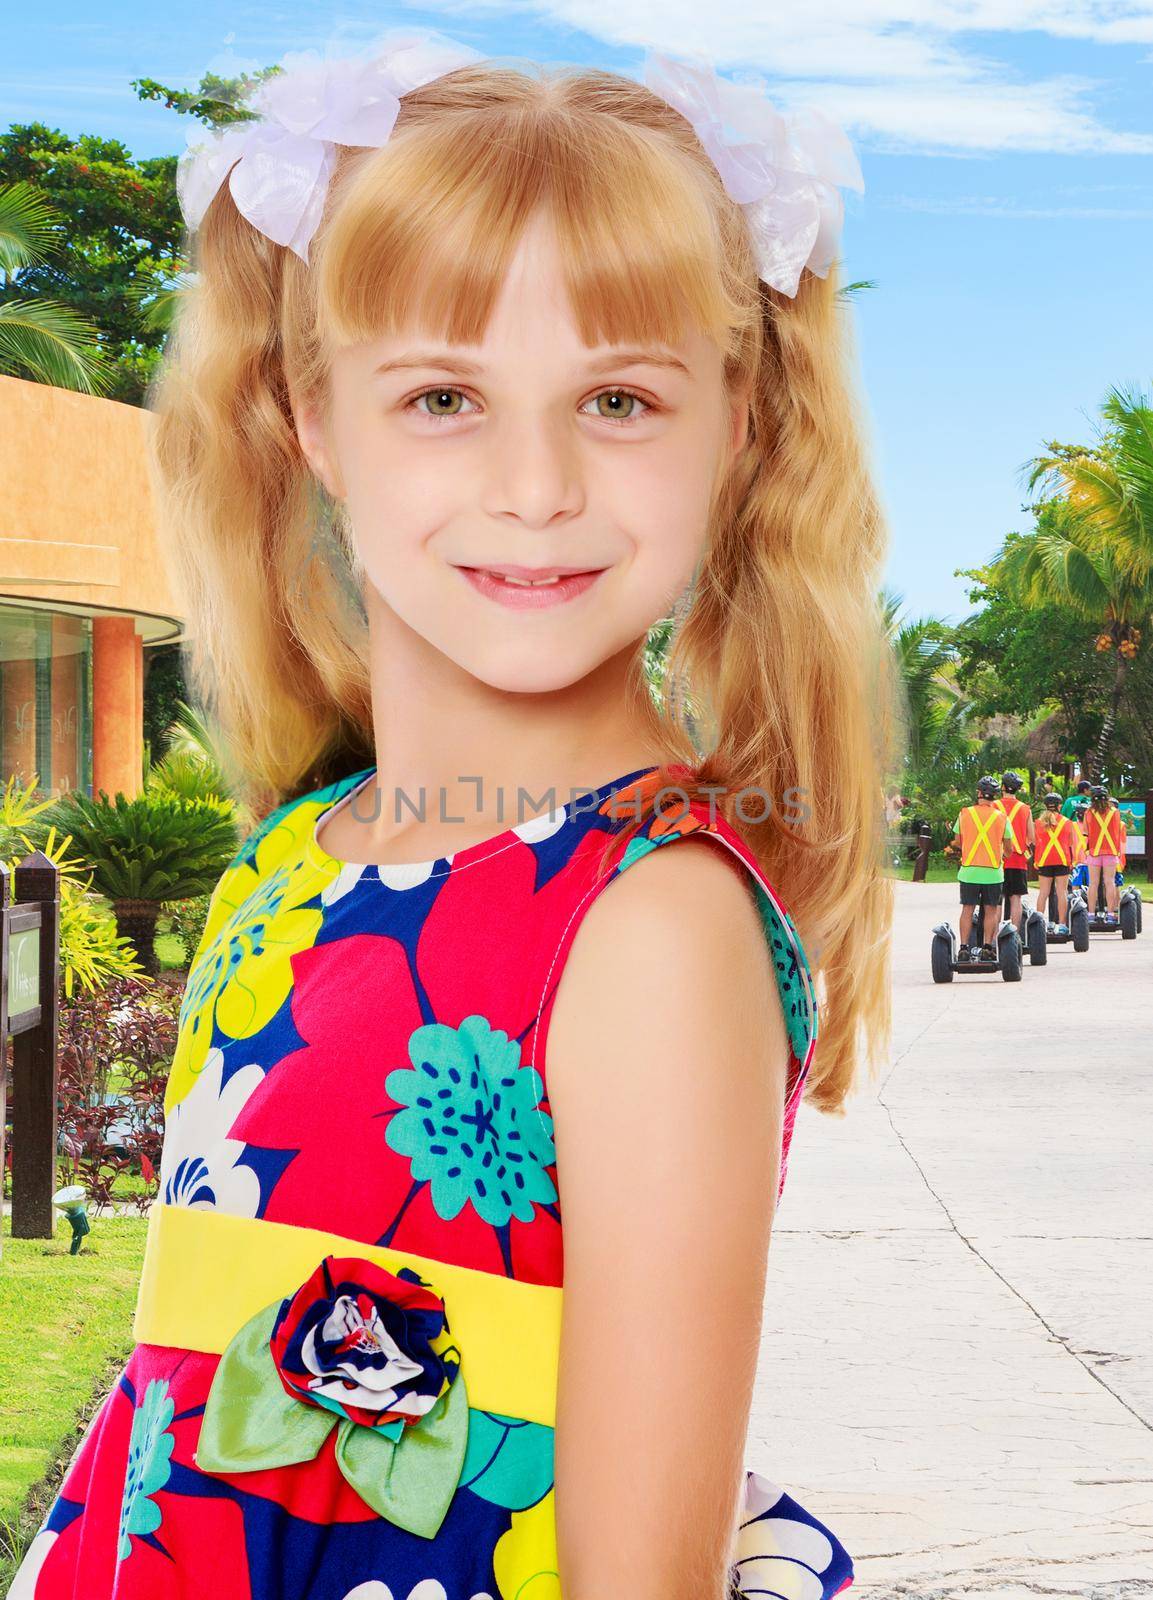 Sweet, adorable little girl with long blonde ponytails on her head tied with white bows. Close-up.On the background of the road, palm trees and blue sky with clouds.